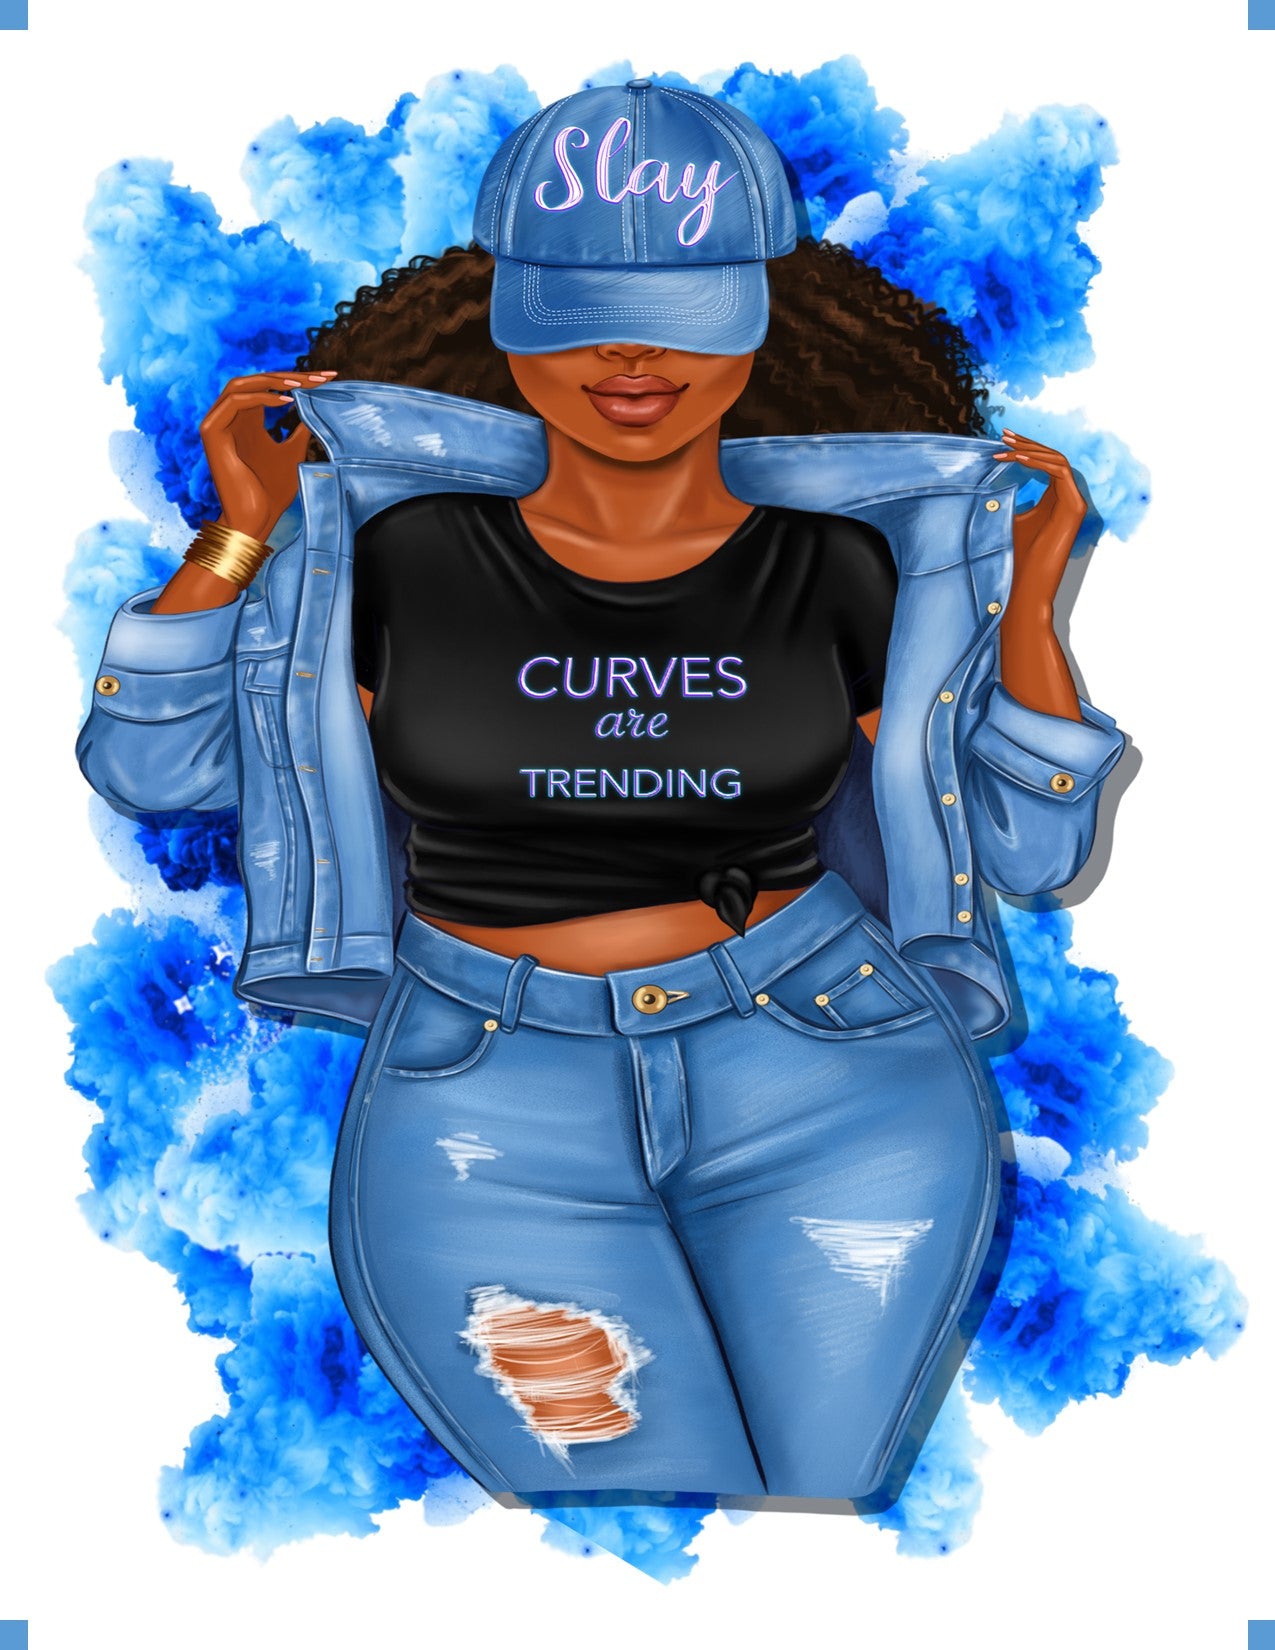 Curves are Trending (Curly hair down with cap)